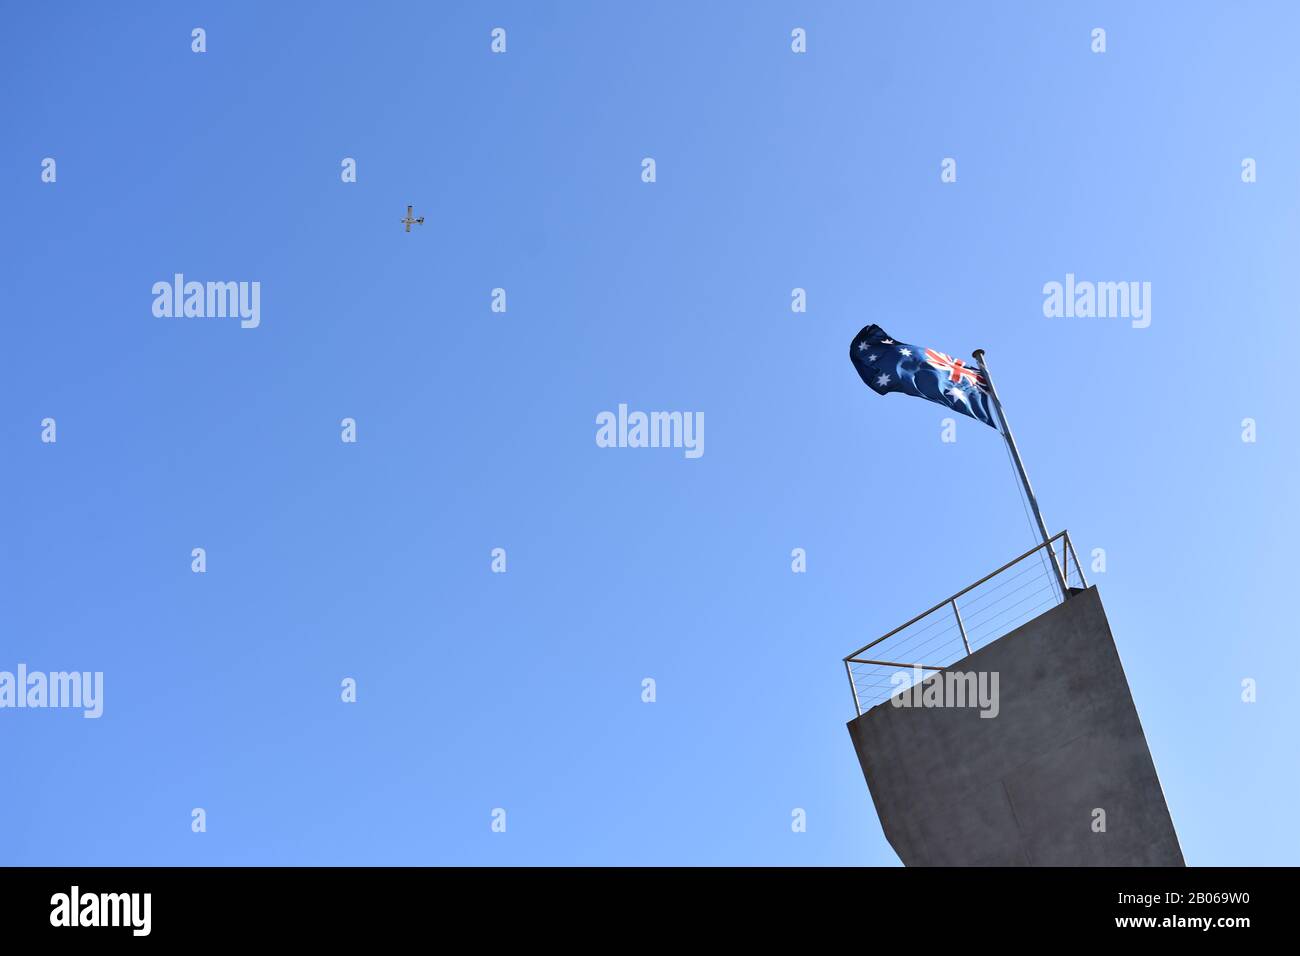 Plane Australia Flag High Resolution Stock Photography and Images - Alamy